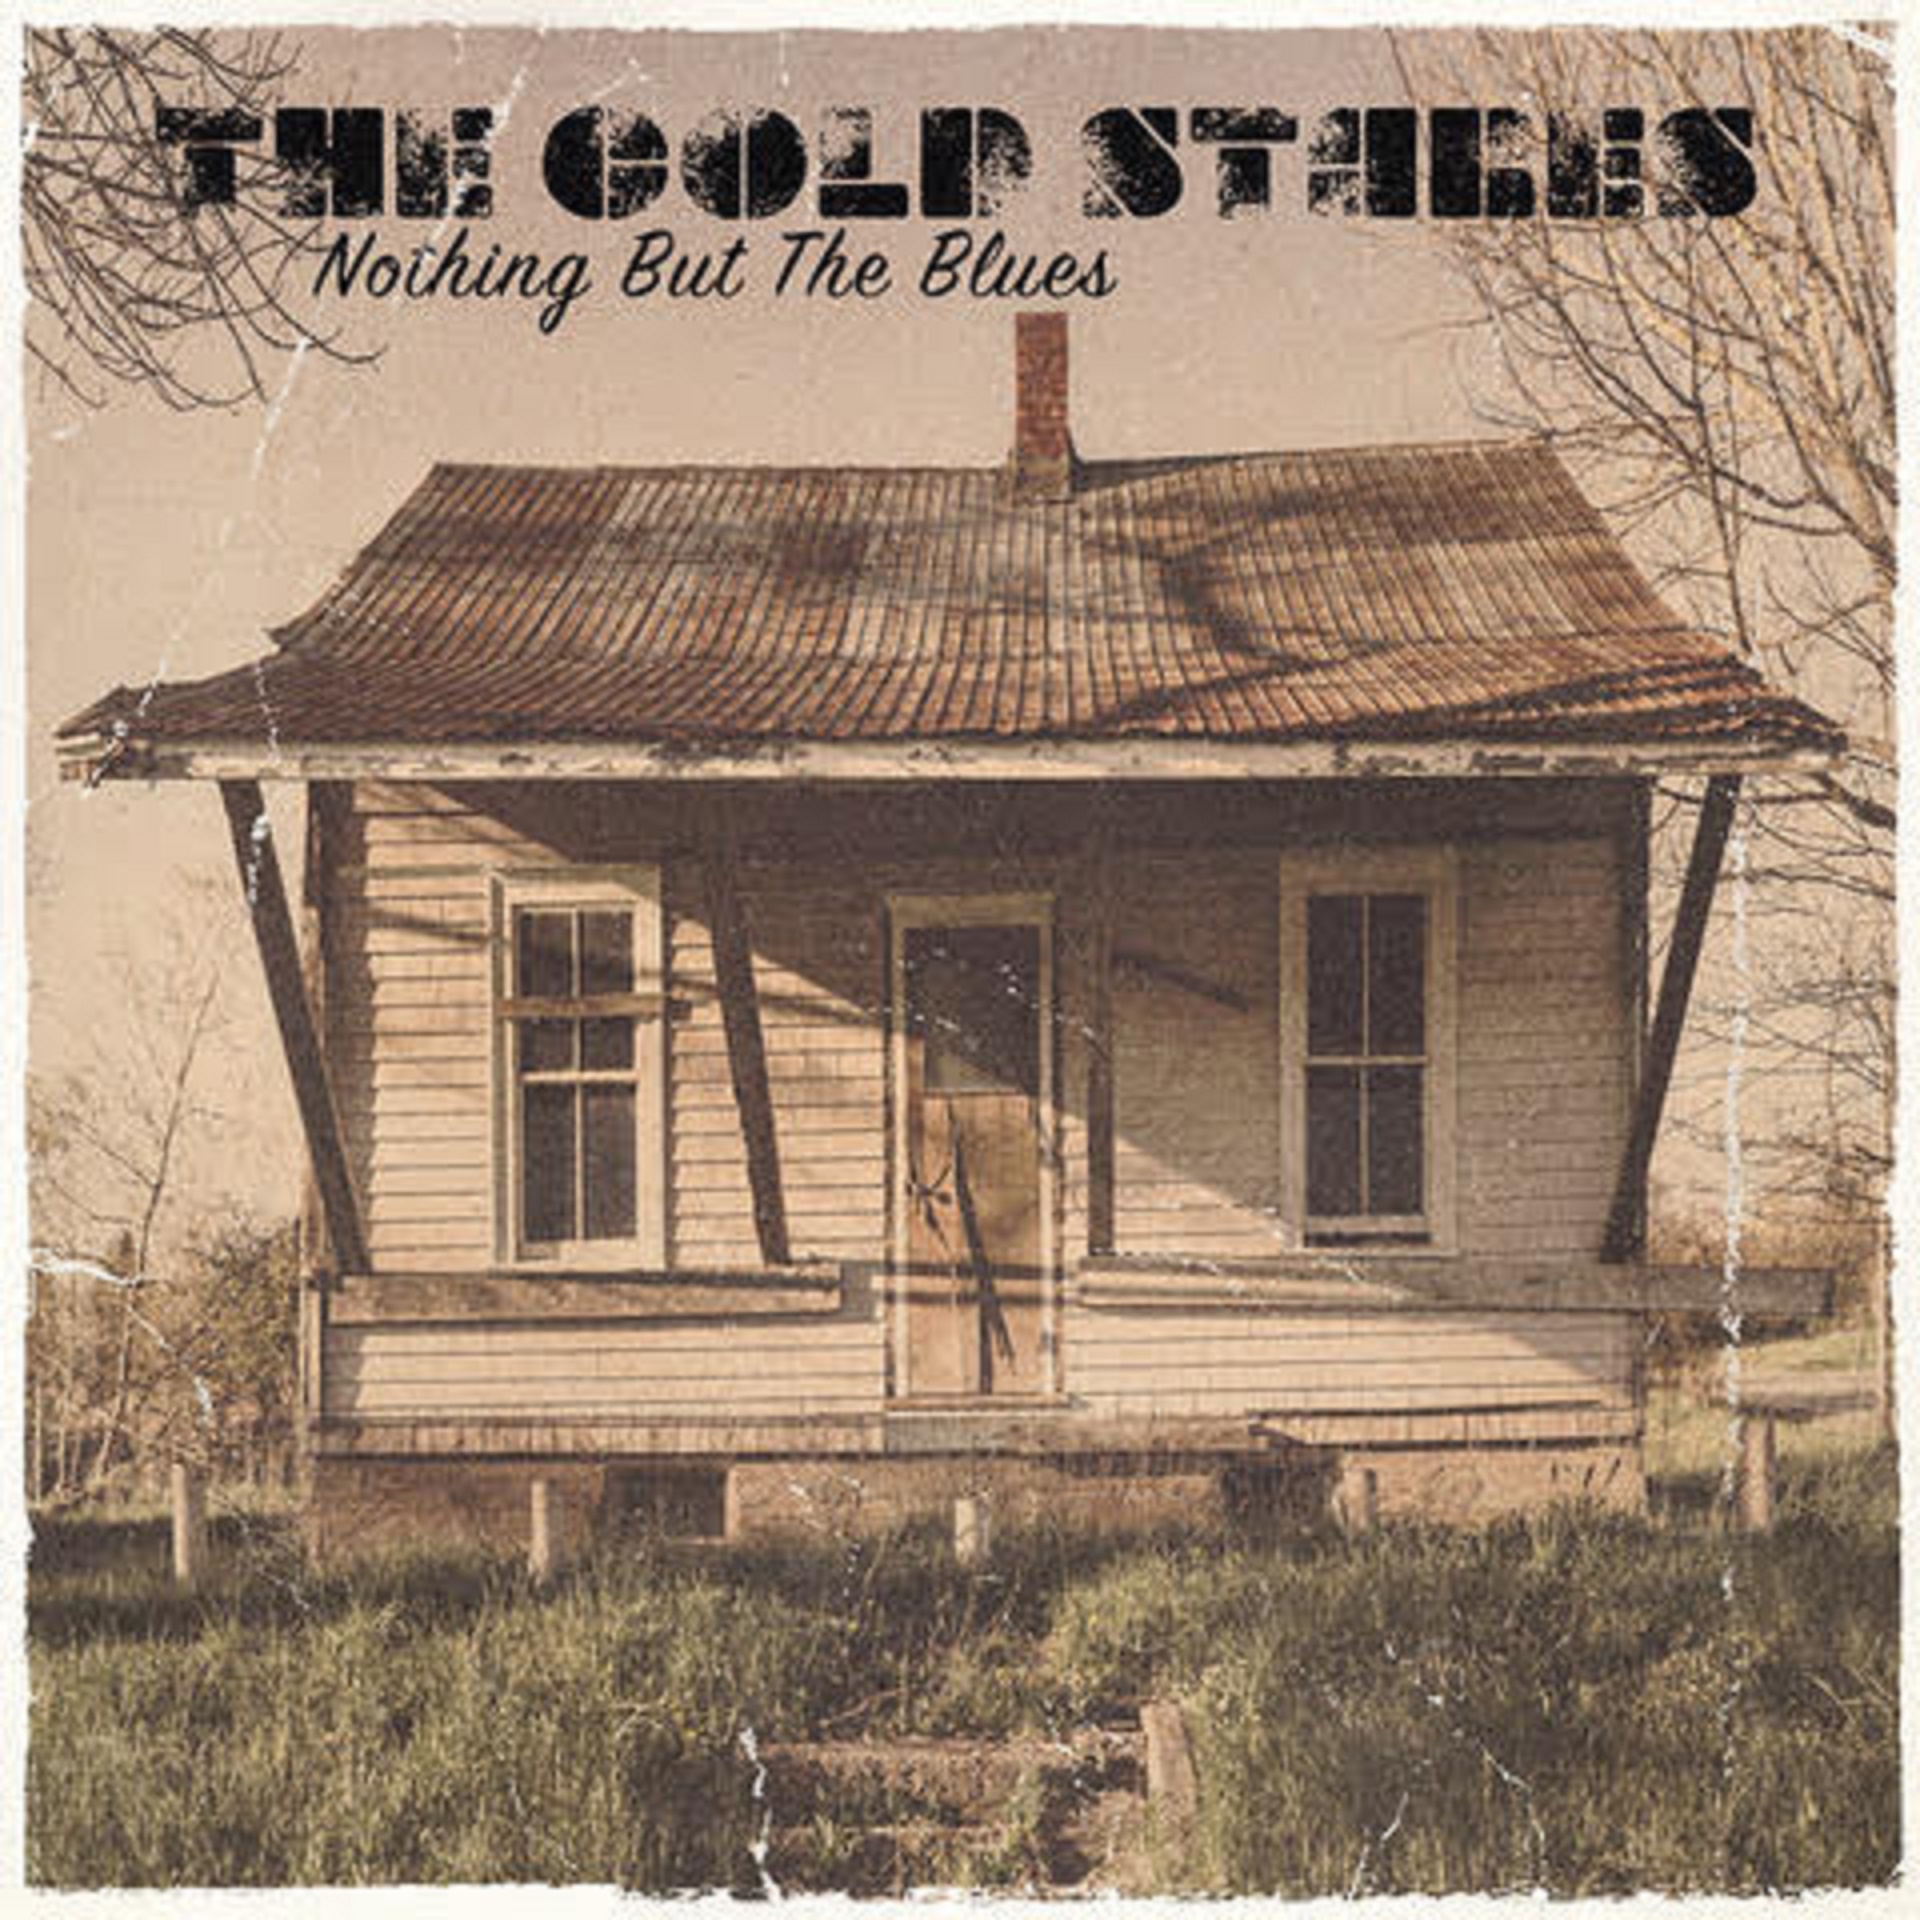 Indiana blues-rock outfit The Cold Stares release two new tracks